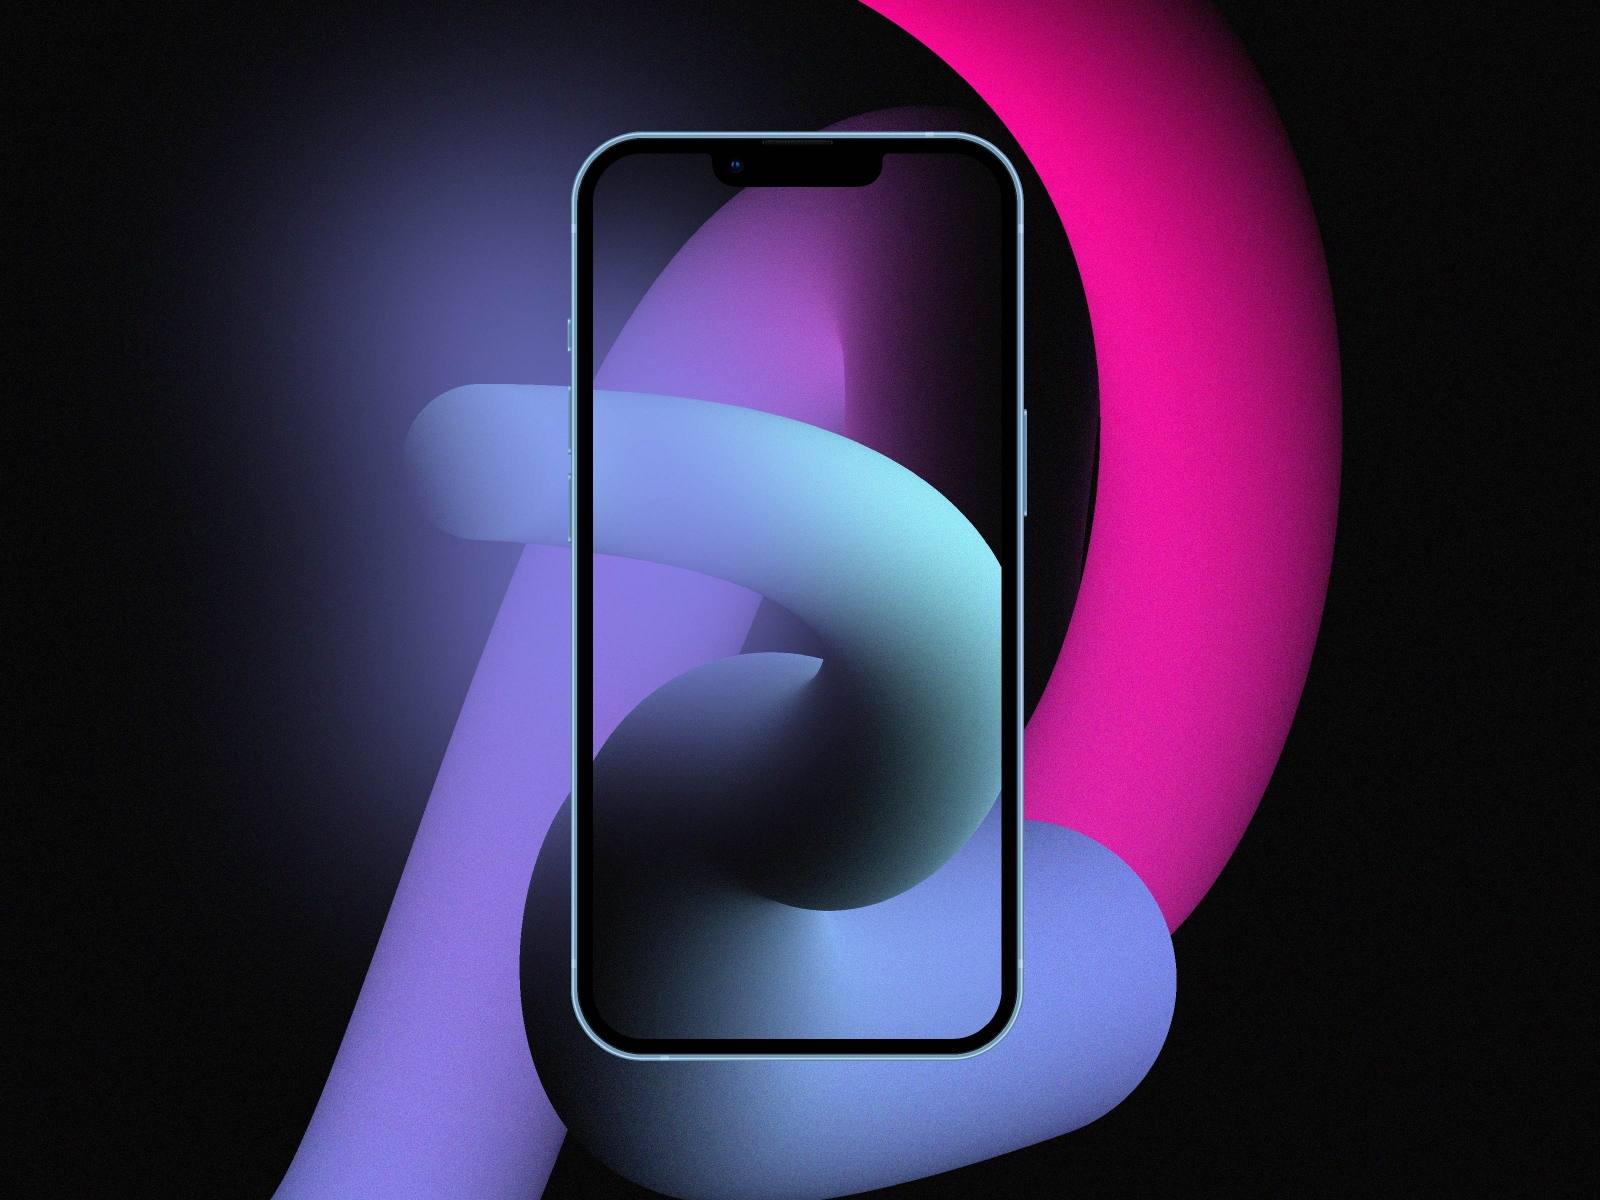 Download Apples new iPhone 13 wallpapers right here 9to5Mac